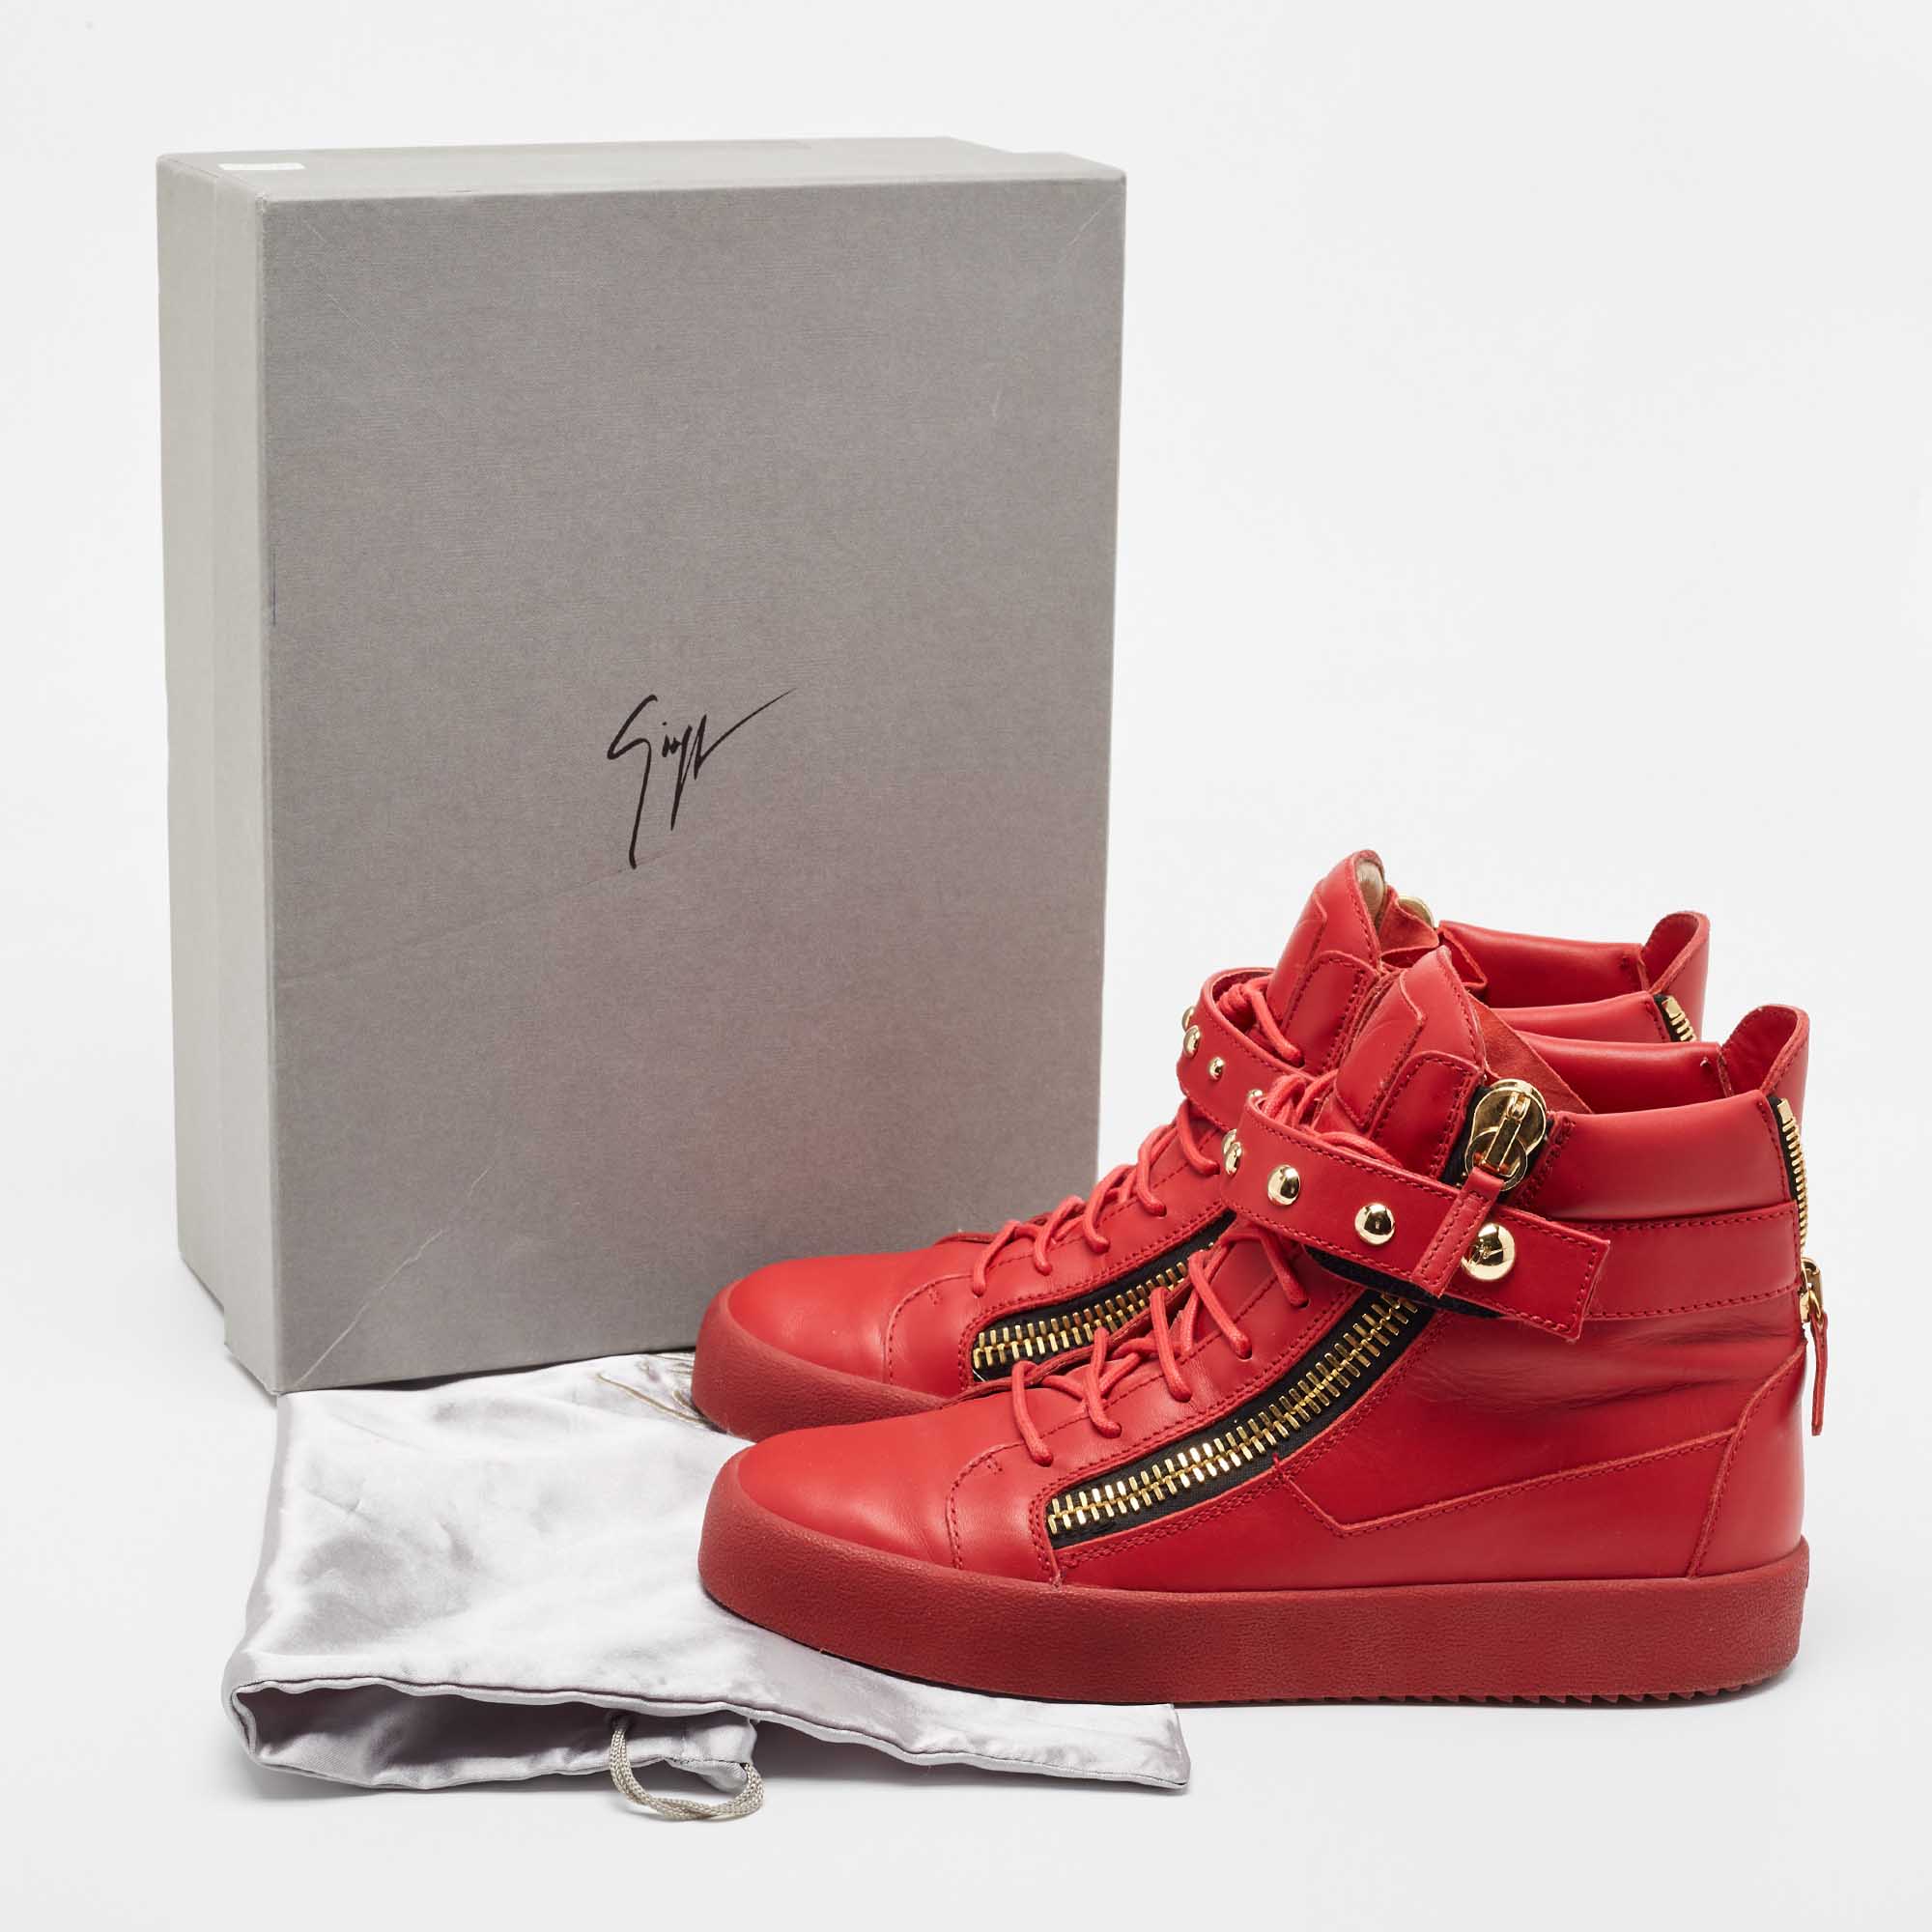 Giuseppe Zanotti Red Leather Studded Double Zip High Top Sneakers Size 44